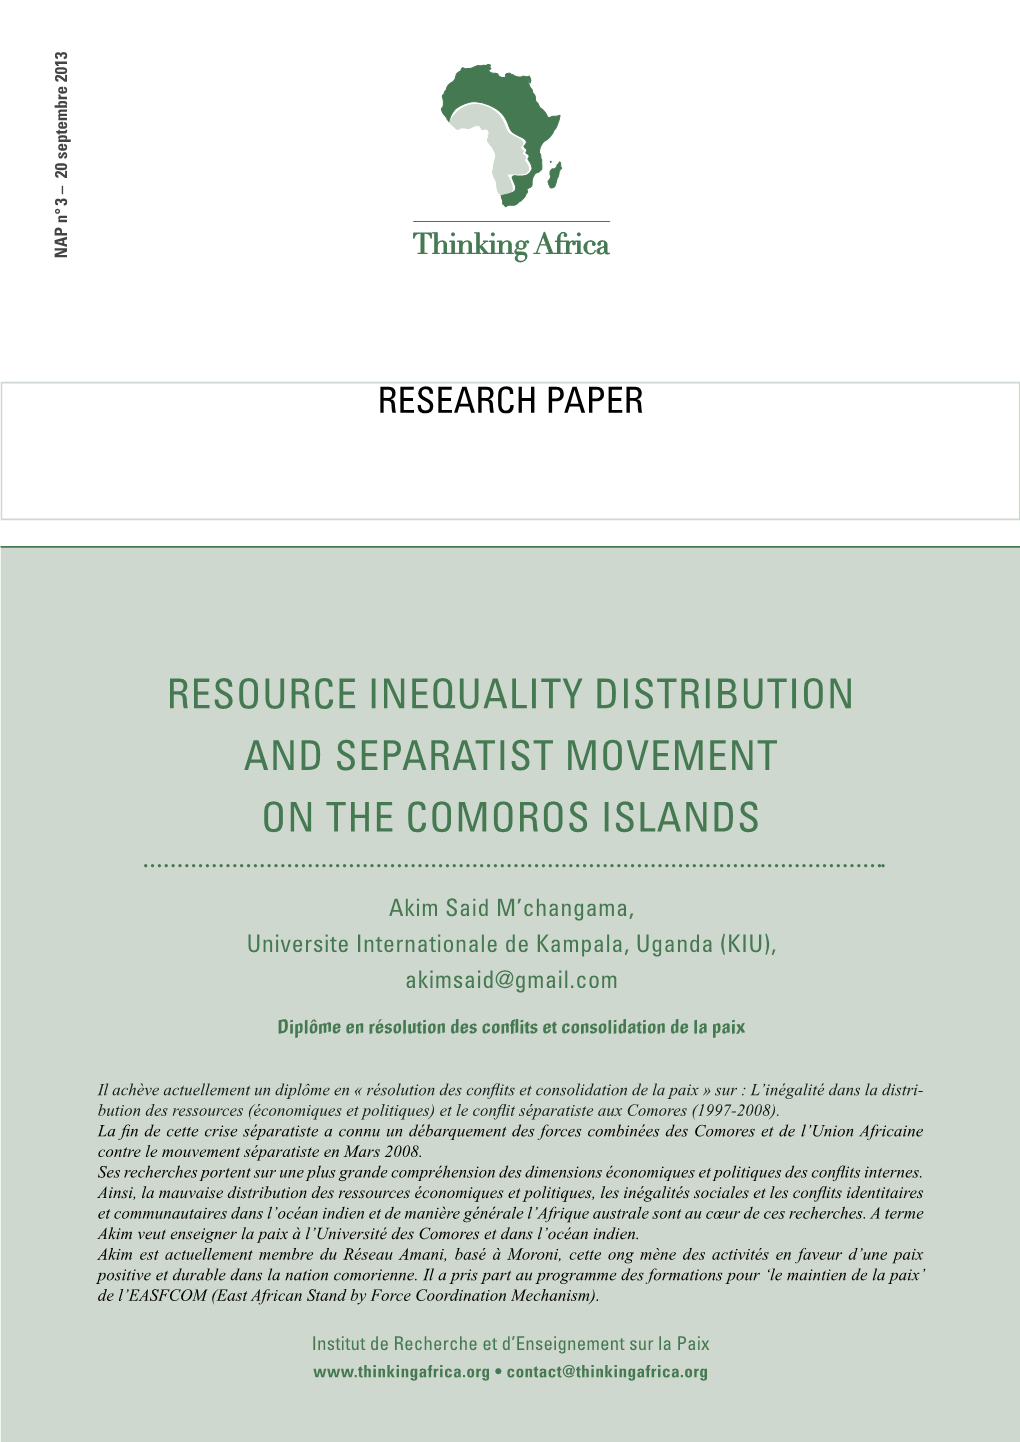 Resource Inequality Distribution and Separatist Movement on the Comoros Islands